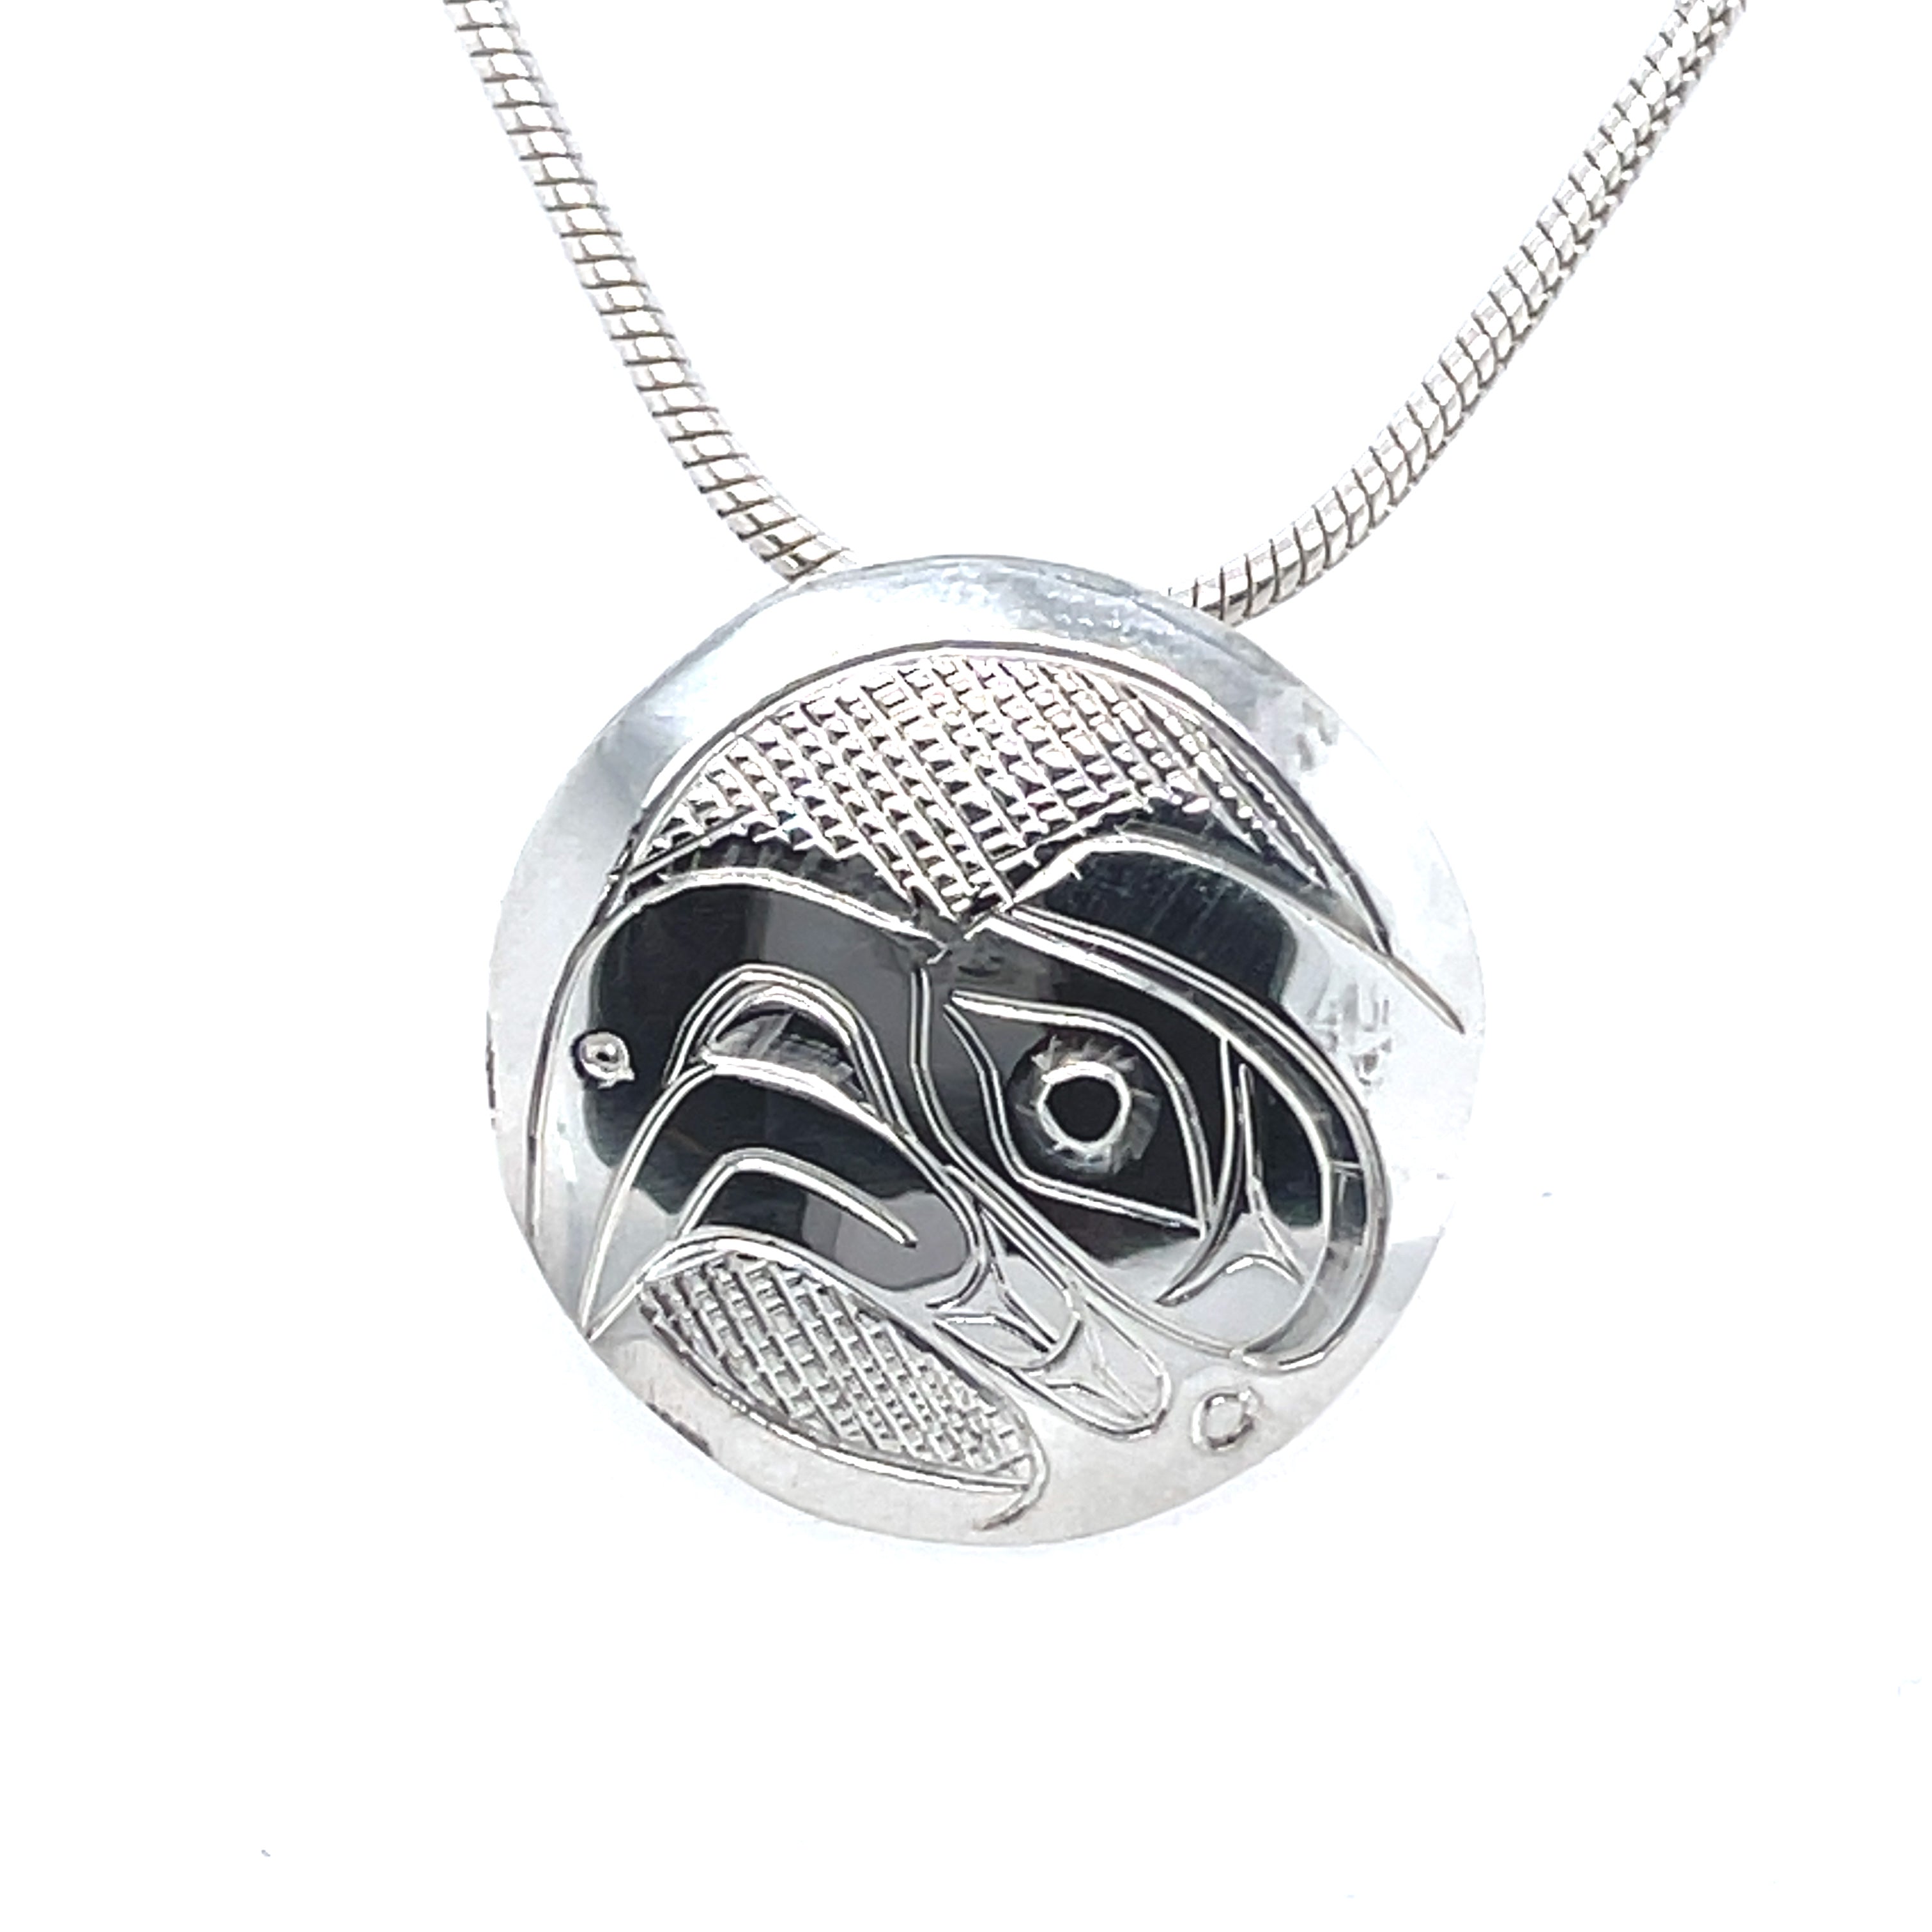 Pendant - Sterling Silver - Round - Eagle